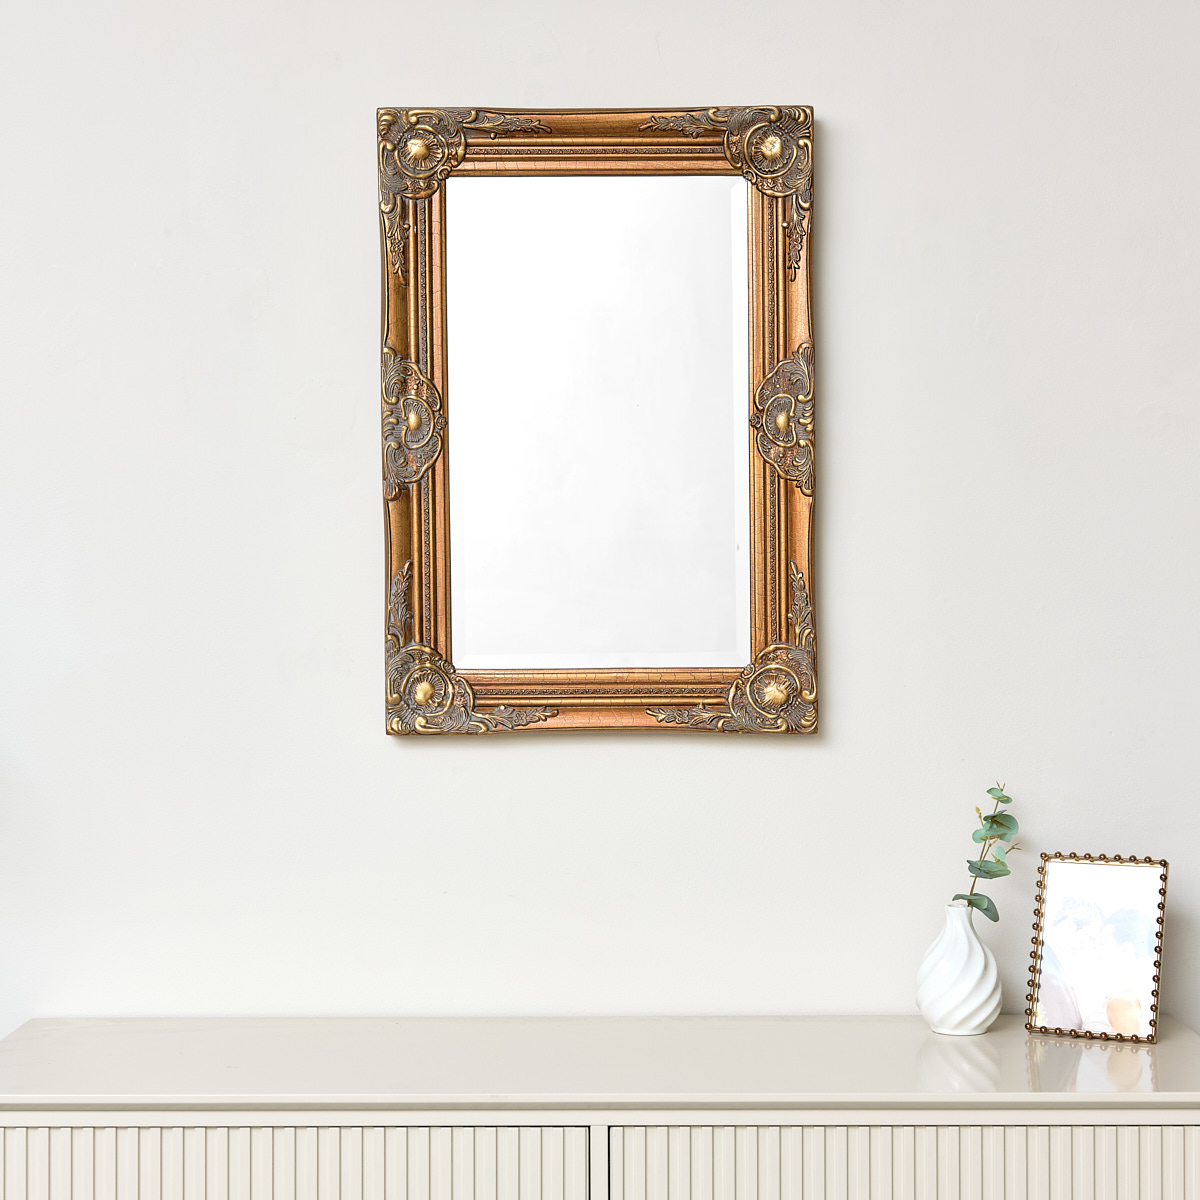 Antique Gold Ornate Rectangle Wall Mirror 65cm x 45cm